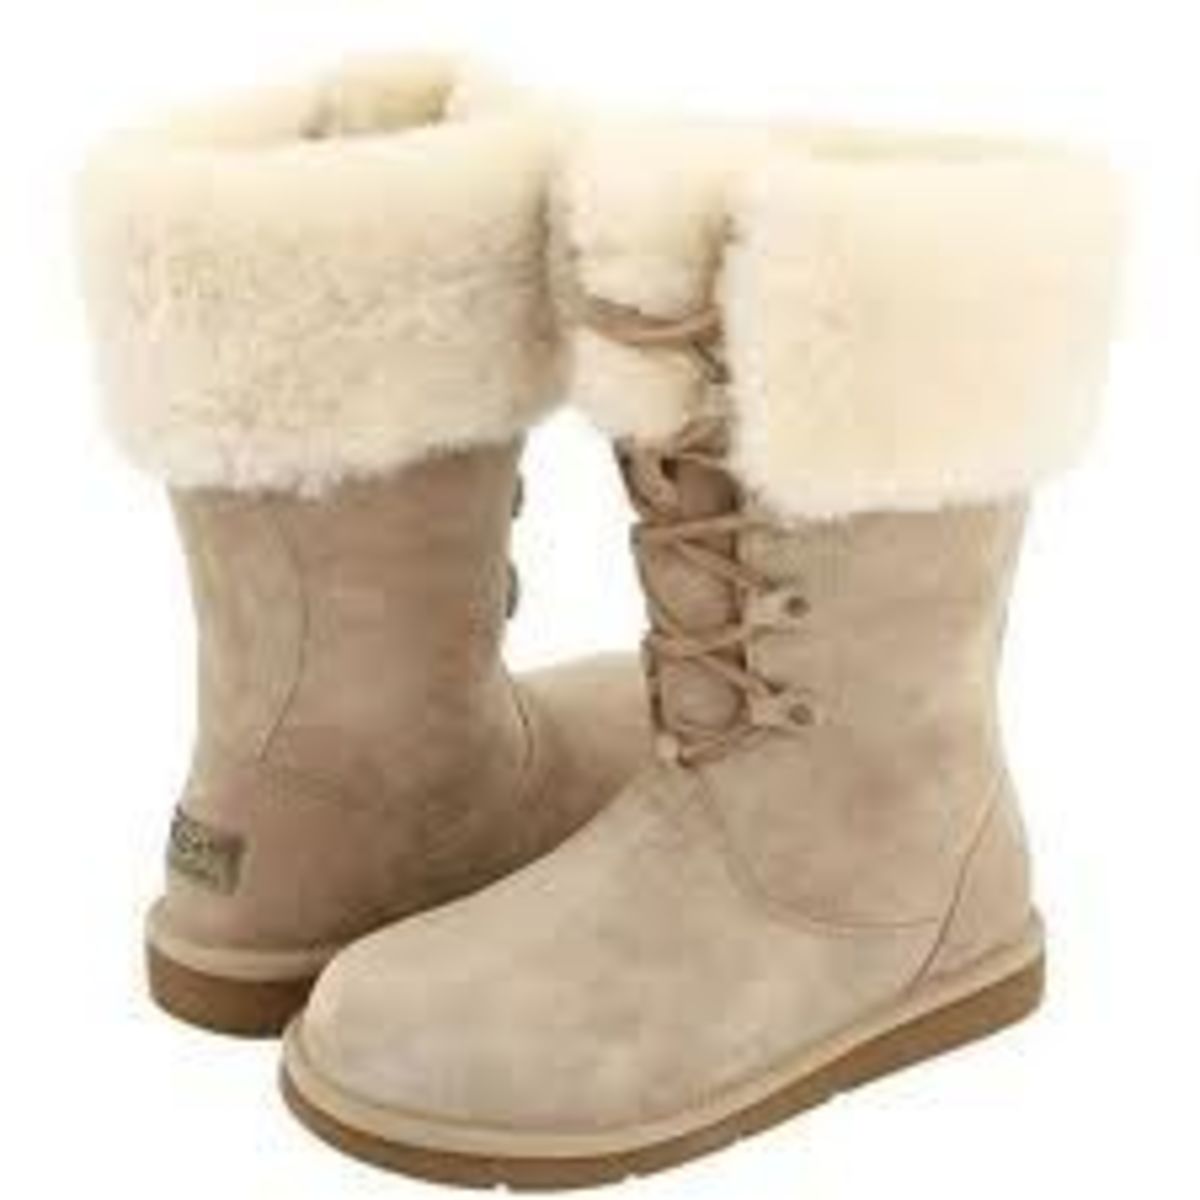 wash ugg boots without ruining them